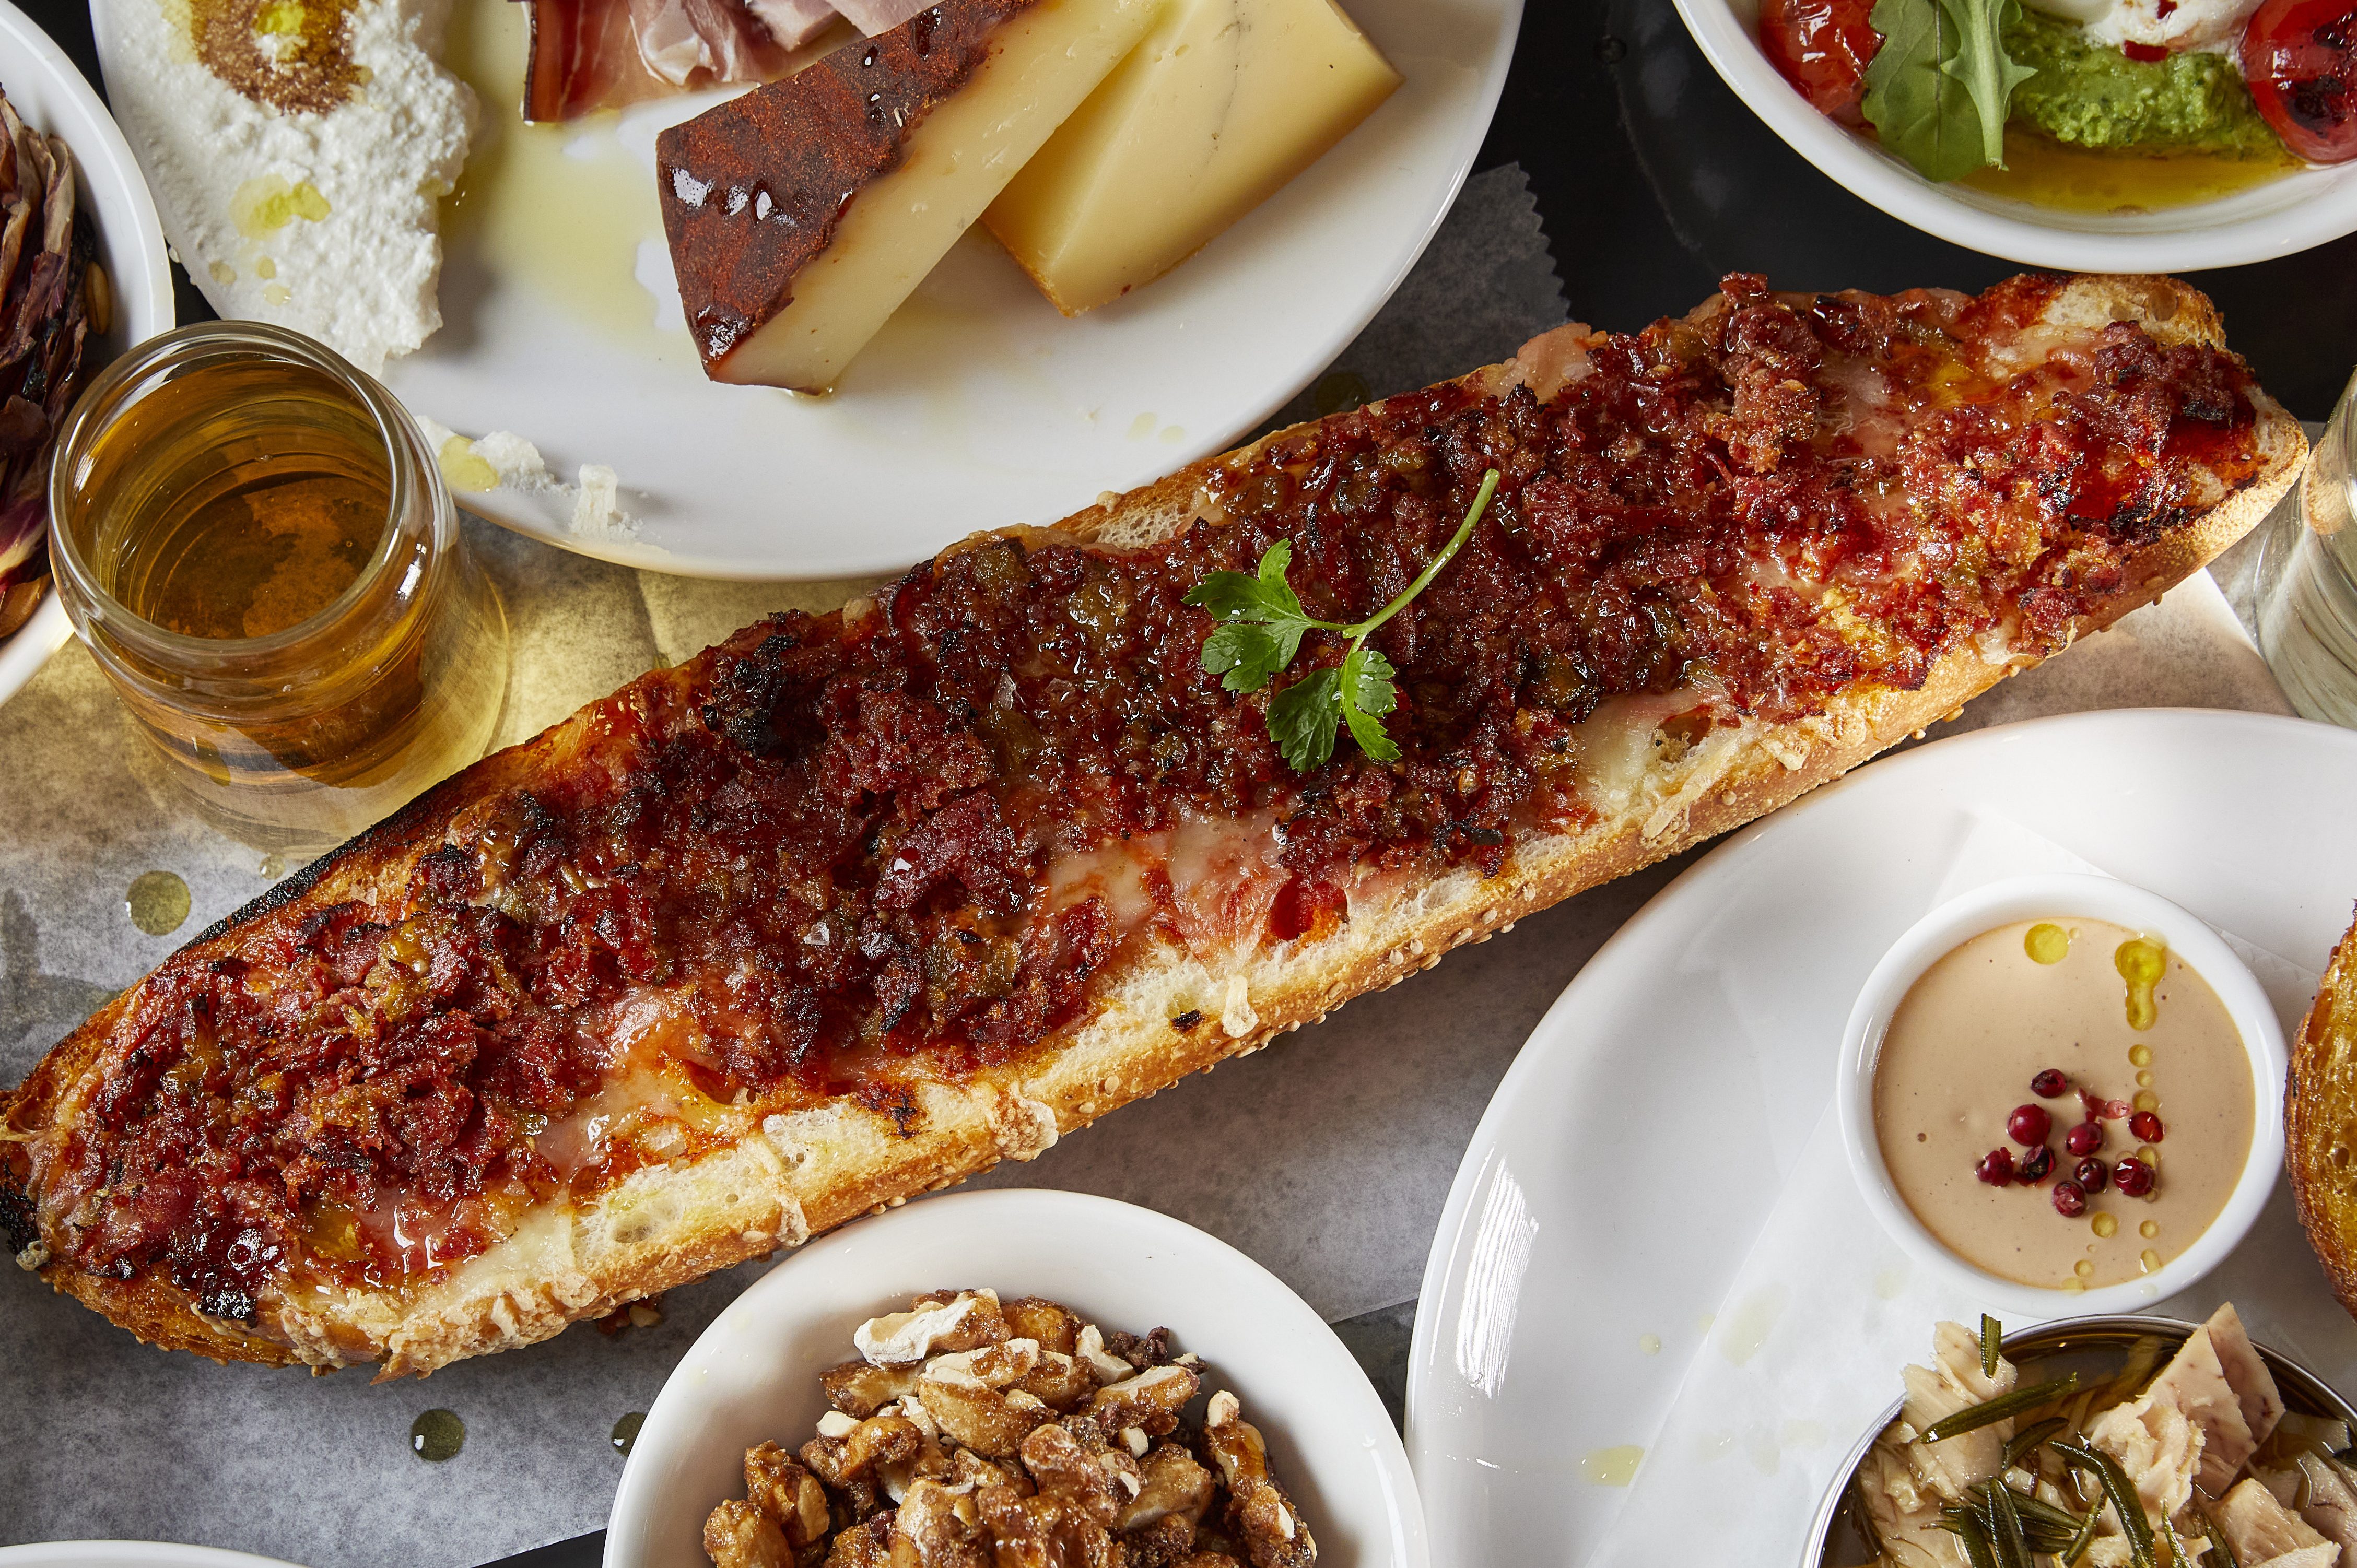 French bread pizza is the perfect vessel for pepperoni consumption